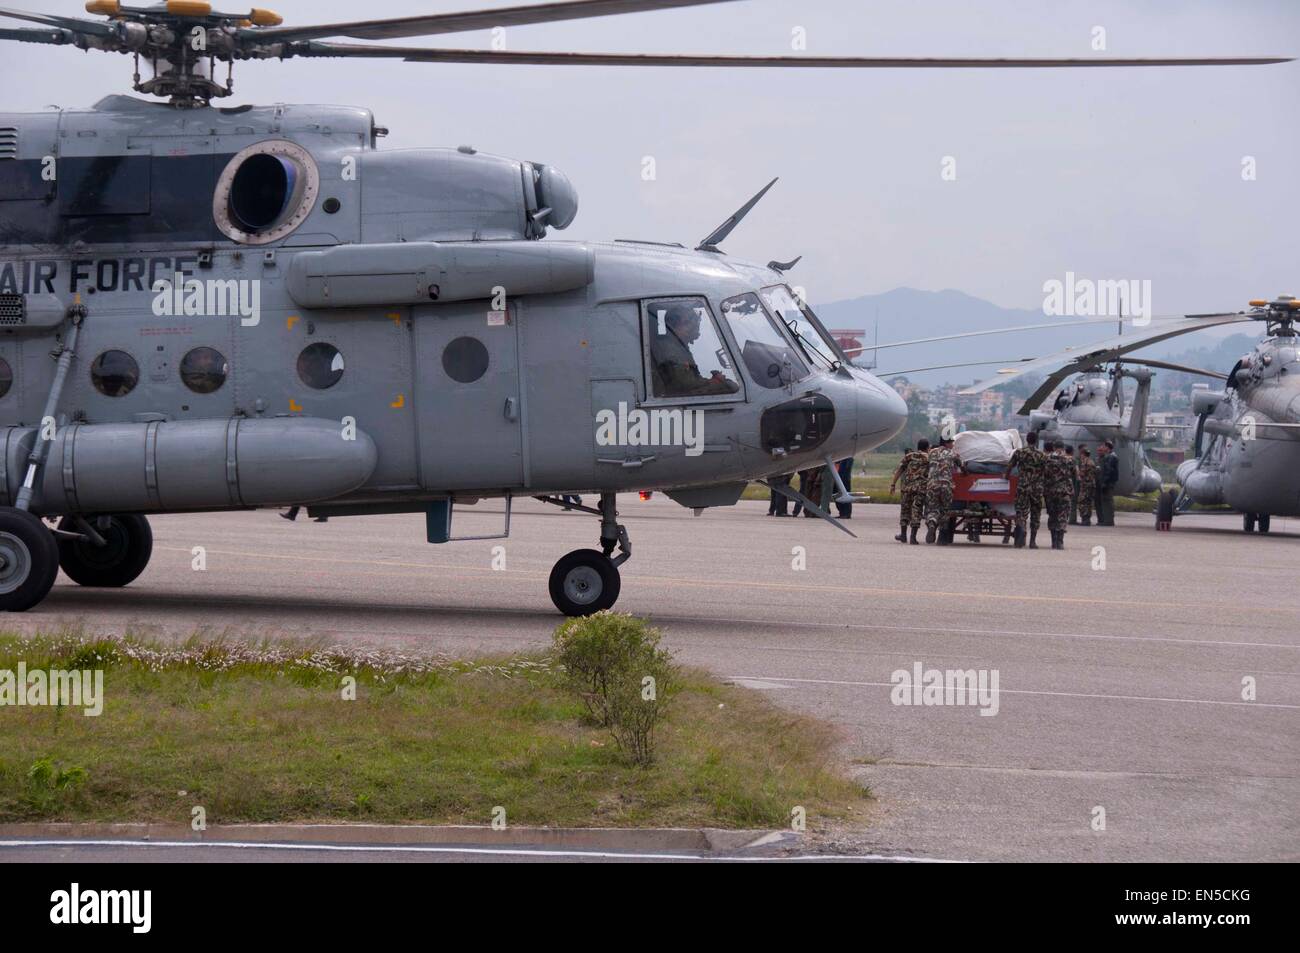 Kathmandu, Nepal. 28th Apr, 2015. International rescue teams arrive at Tribhuvan International Airport in Kathmandu, Nepal, April 28, 2015. The death toll from a powerful earthquake in Nepal soared to 4,555 and a total of 8,299 others were injured, the Nepal Police said. Various international rescue teams performed relief operations in affected regions. Credit:  Pratap Thapa/Xinhua/Alamy Live News Stock Photo